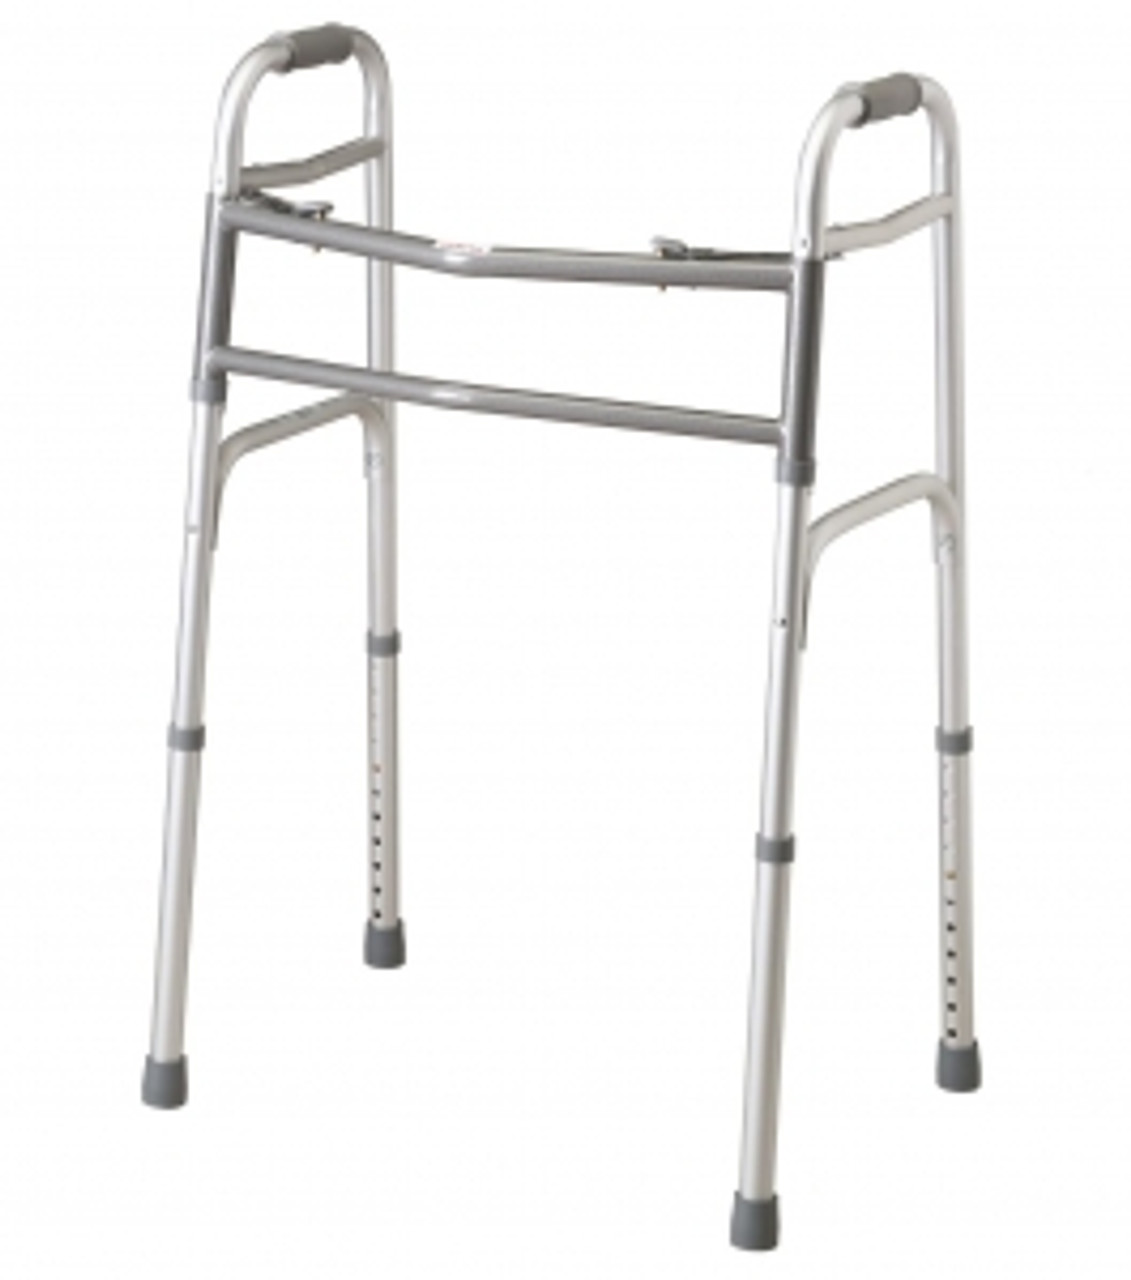 Higher weight capacities keep larger patients active and moving
Extra-wide frames give larger patients a more comfortable fit
Two-button folding capabilities let patients receive support through narrow spaces
Frame with front cross brace and dual side braces provides durability